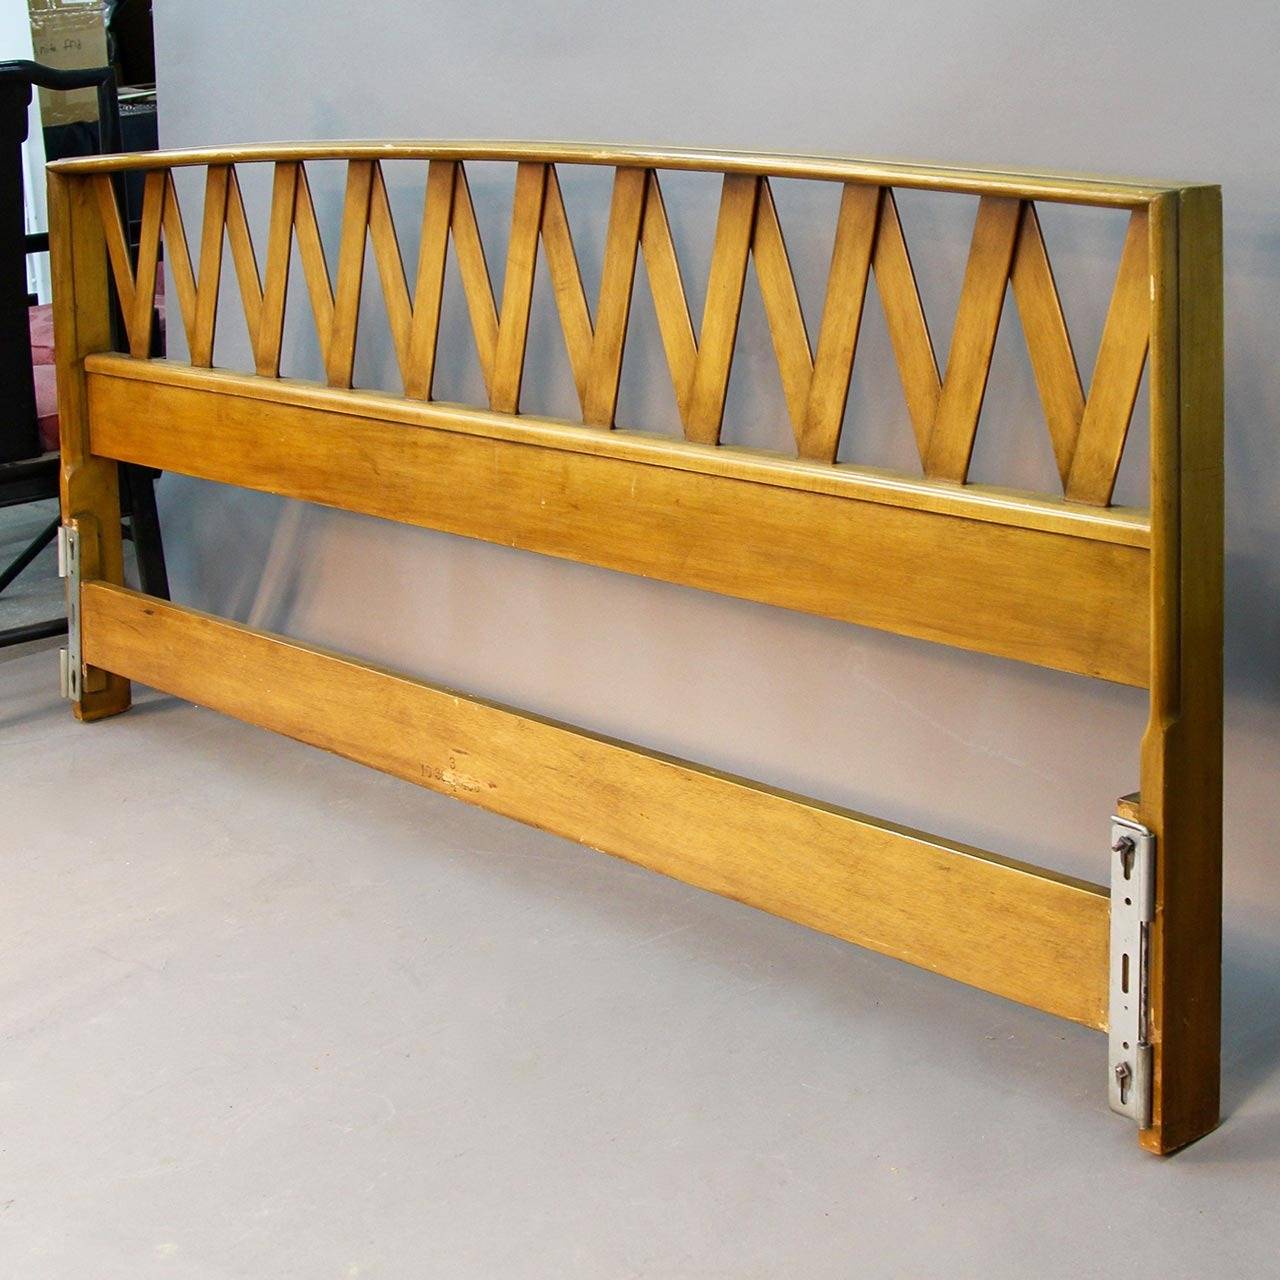 Gorgeous Mid-Century Modern kind size headboard by Paul Frankl. Iconic Paul Frankl zigs zagging. Honey brown stained color.